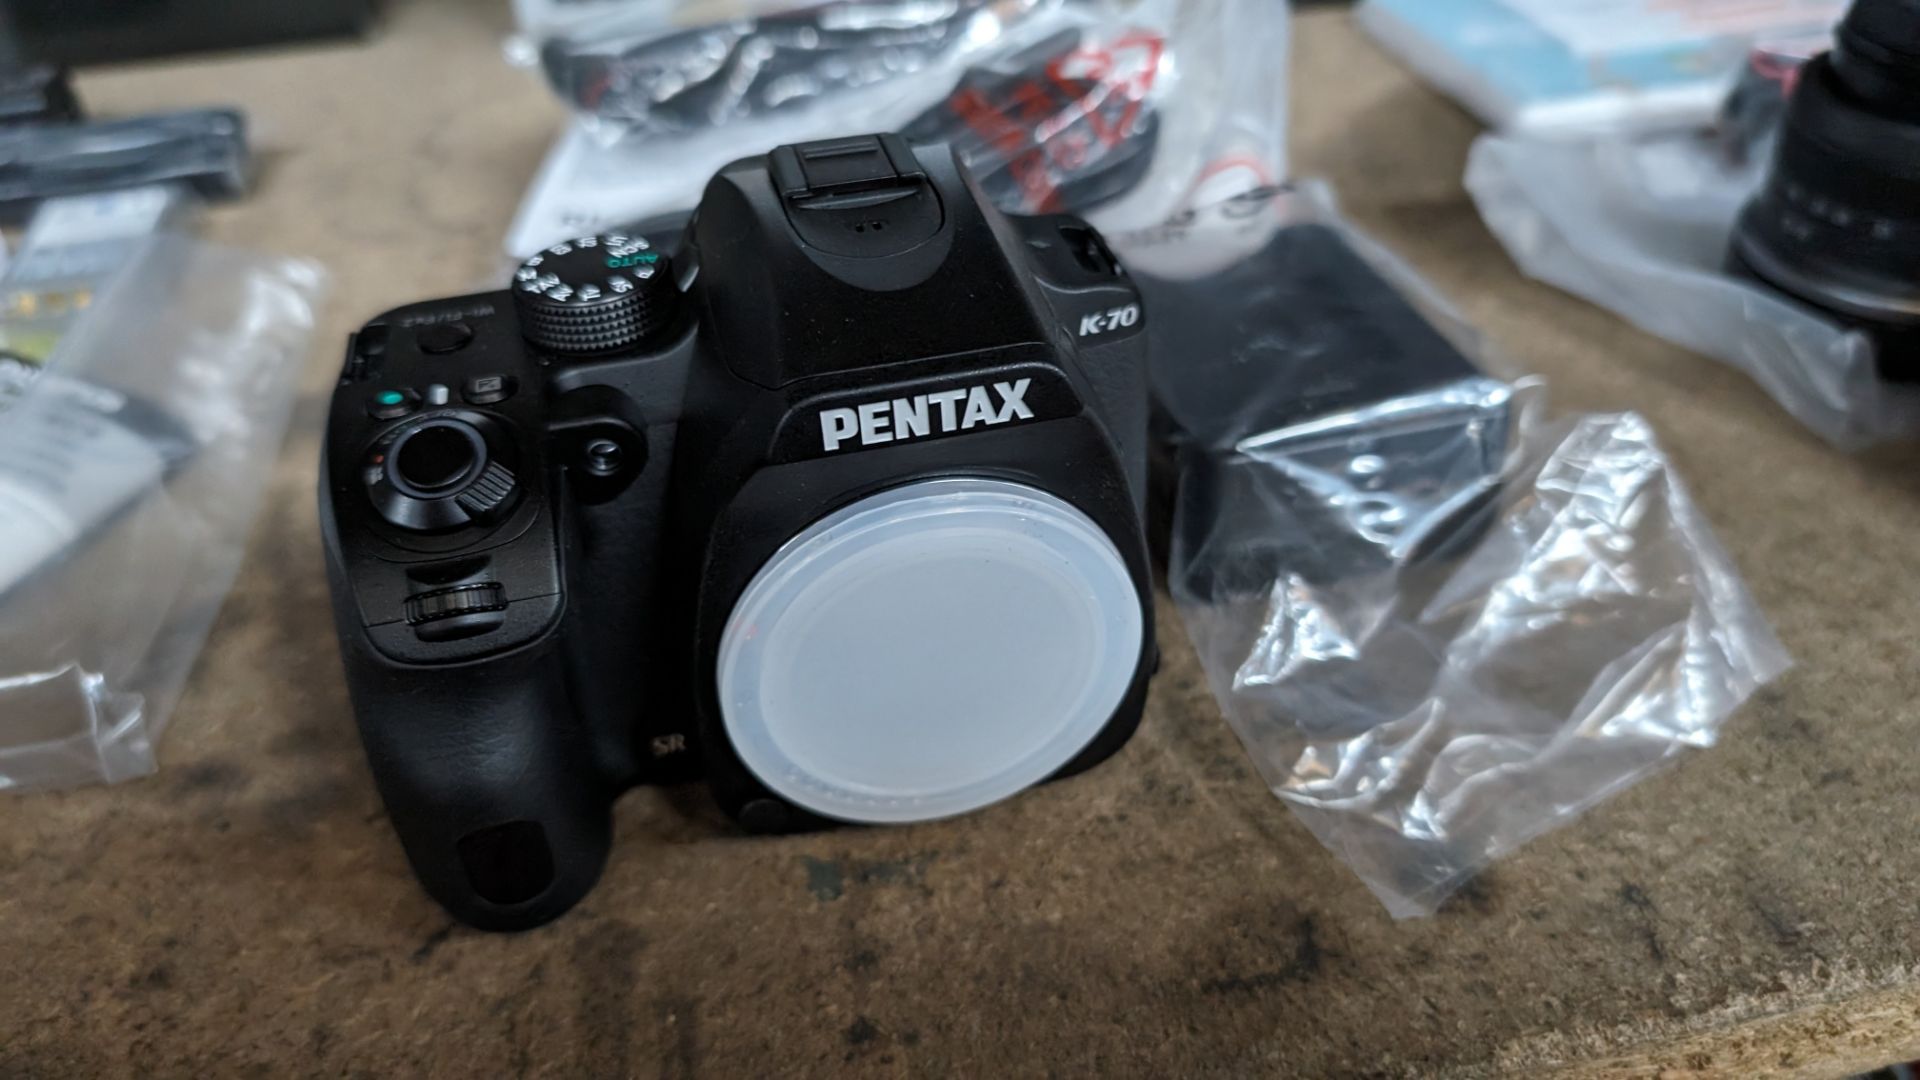 Pentax K-70 camera body, including strap, cable, battery and charger. NB: The box shows a lens, ho - Image 11 of 14